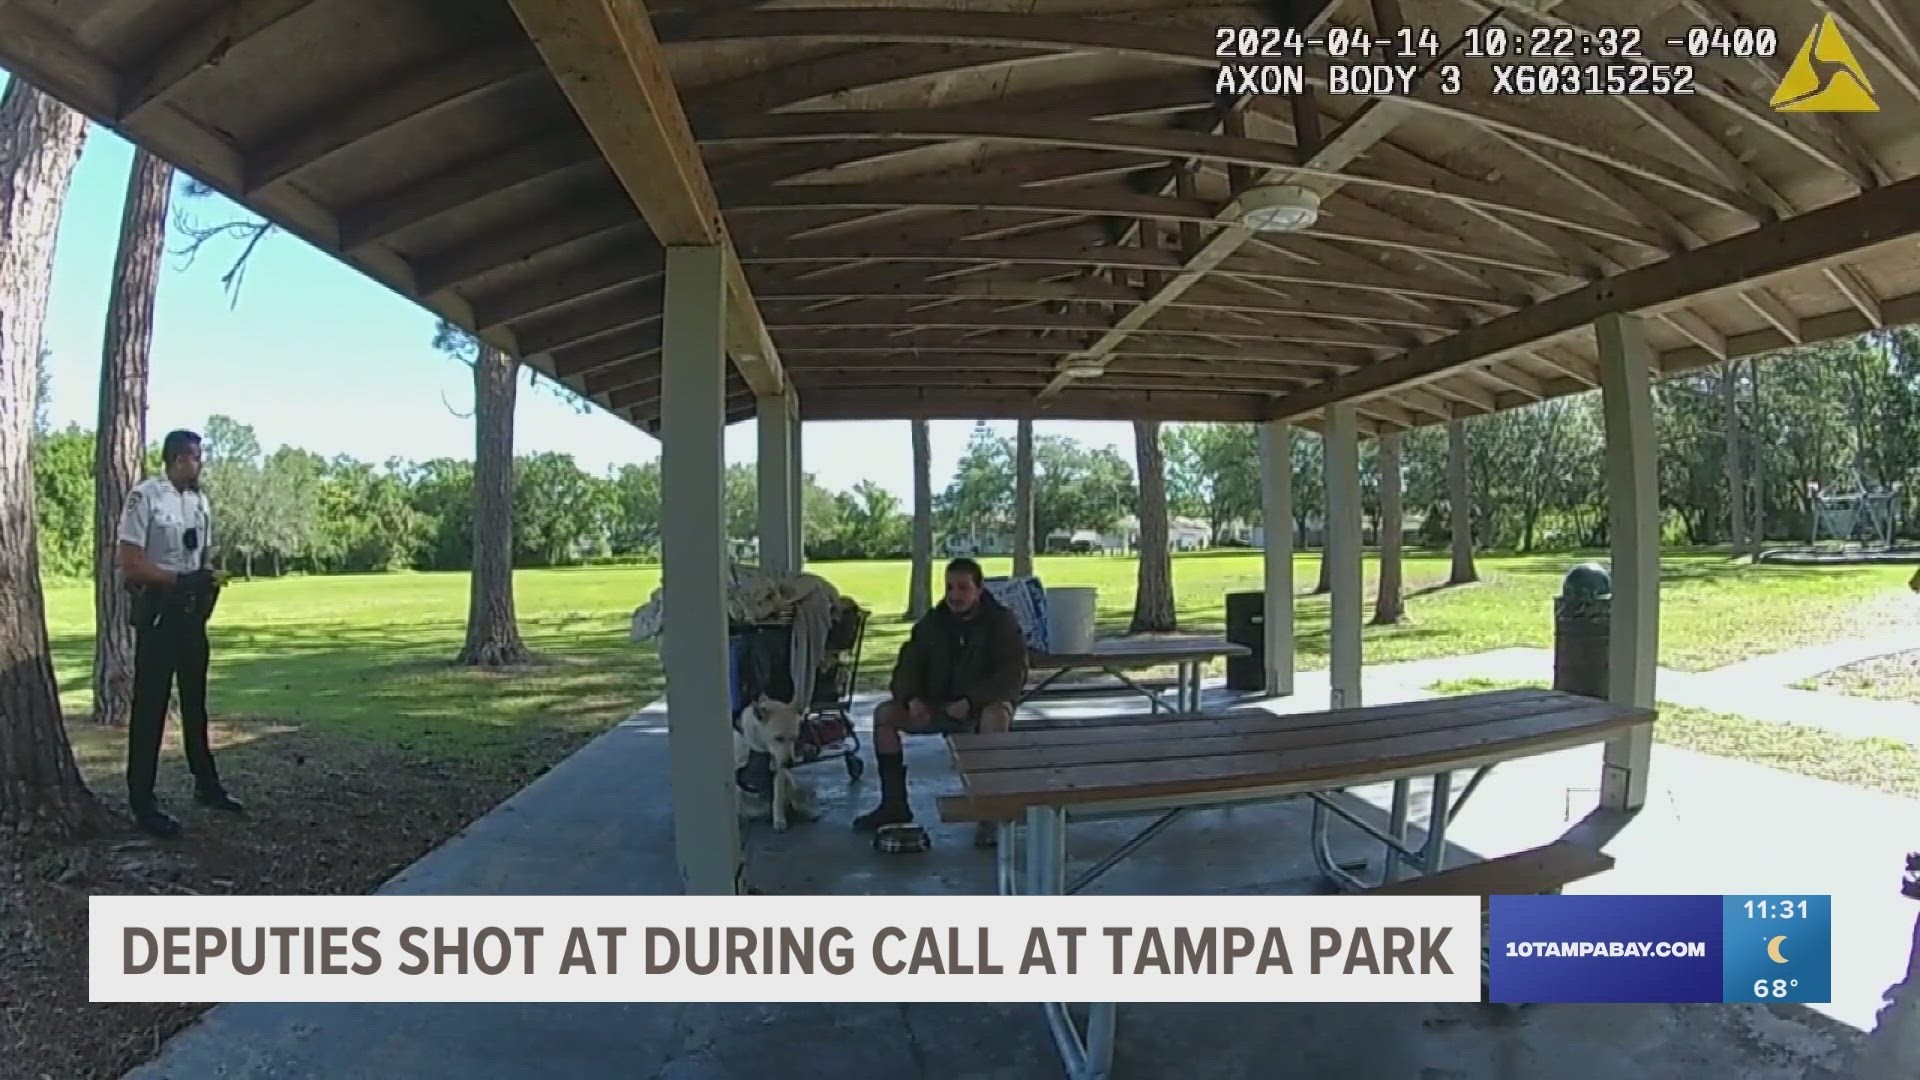 Hillsborough County deputies were trying to get the man to leave the park. They tased him and he fired a gun after hitting the ground.